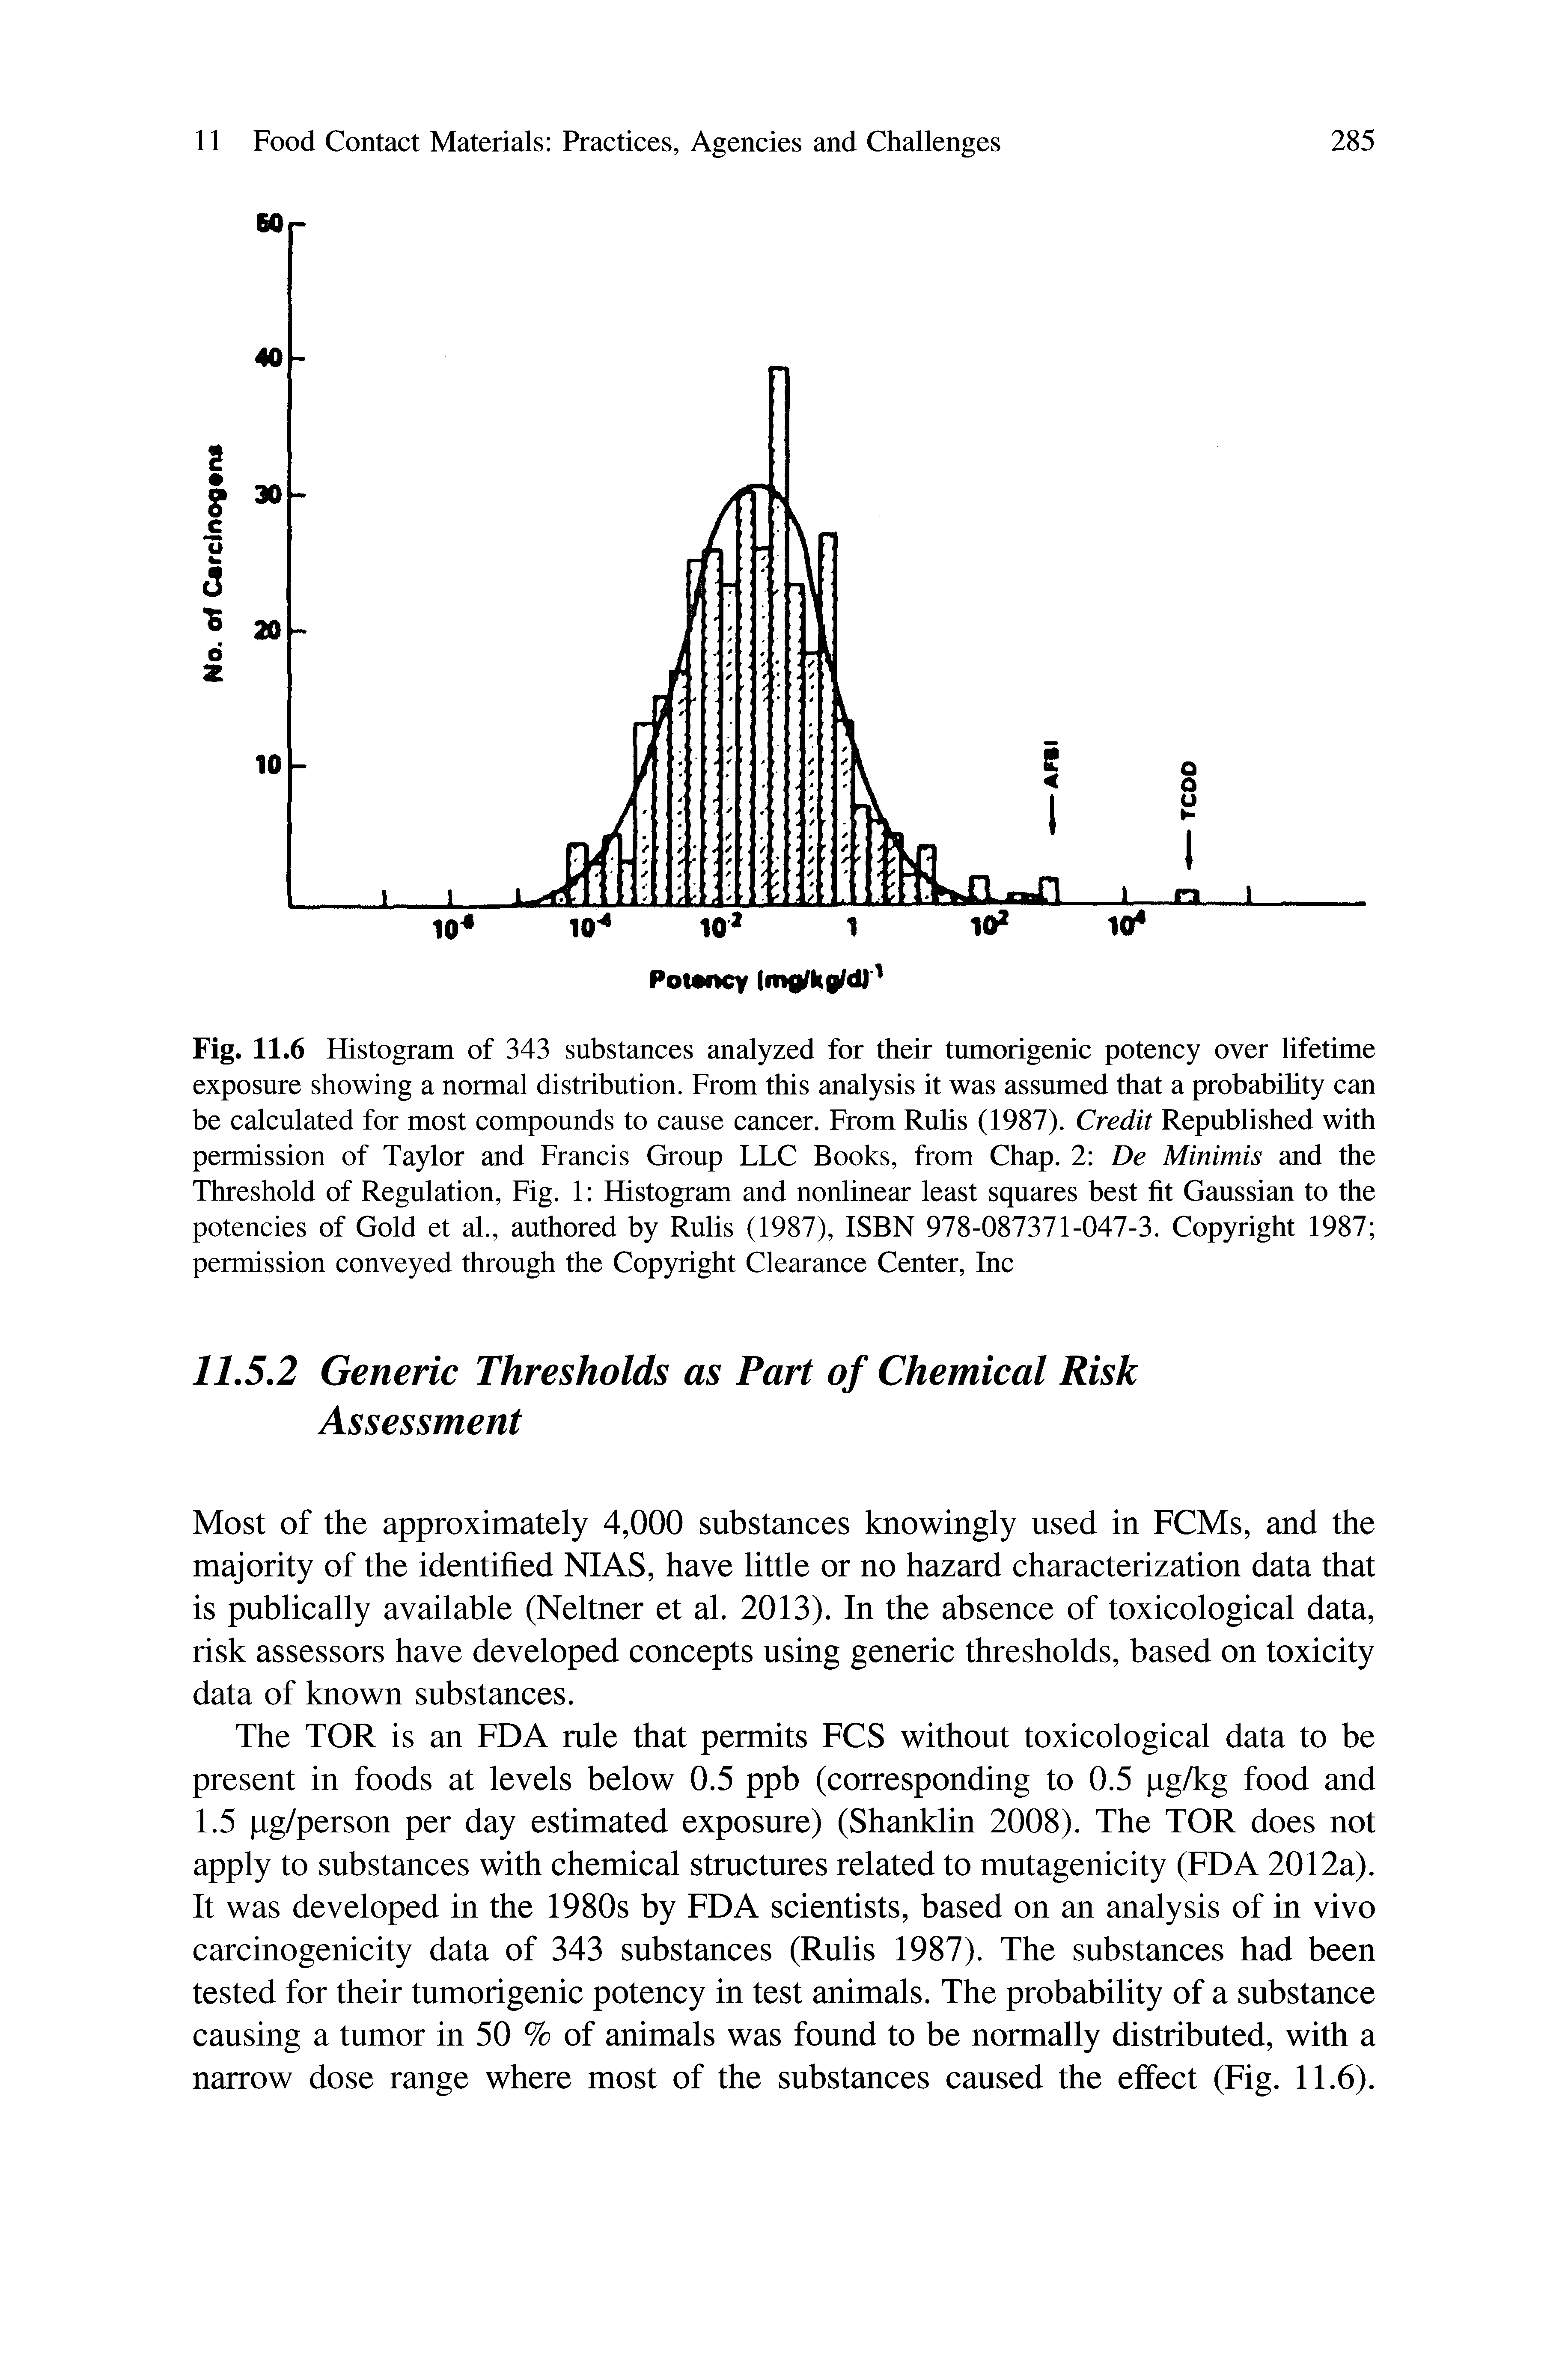 Fig. 11.6 Histogram of 343 substances analyzed for their tumorigenic potency over lifetime exposure showing a normal distribution. From this analysis it was assumed that a probability can be calculated for most compounds to cause cancer. From Rulis (1987). Credit Republished with permission of Taylor and Francis Group LLC Books, from Chap. 2 De Minimis and the Threshold of Regulation, Fig. 1 Histogram and nonlinear least squares best fit Gaussian to the potencies of Gold et al., authored by Rulis (1987), ISBN 978-087371-047-3. Copyright 1987 permission conveyed through the Copyright Clearance Center, Inc...